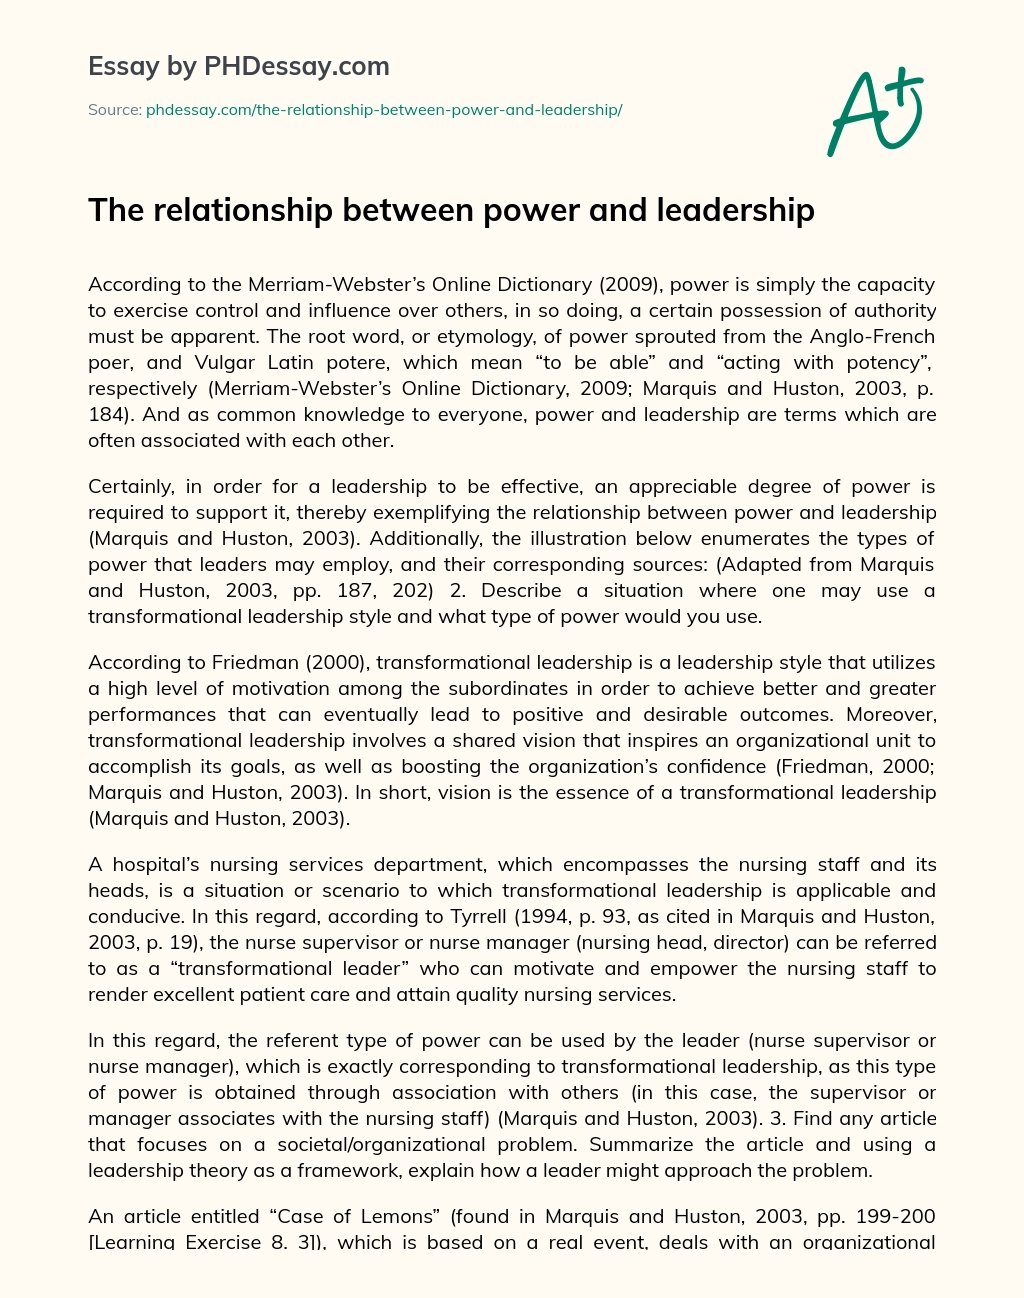 The relationship between power and leadership essay